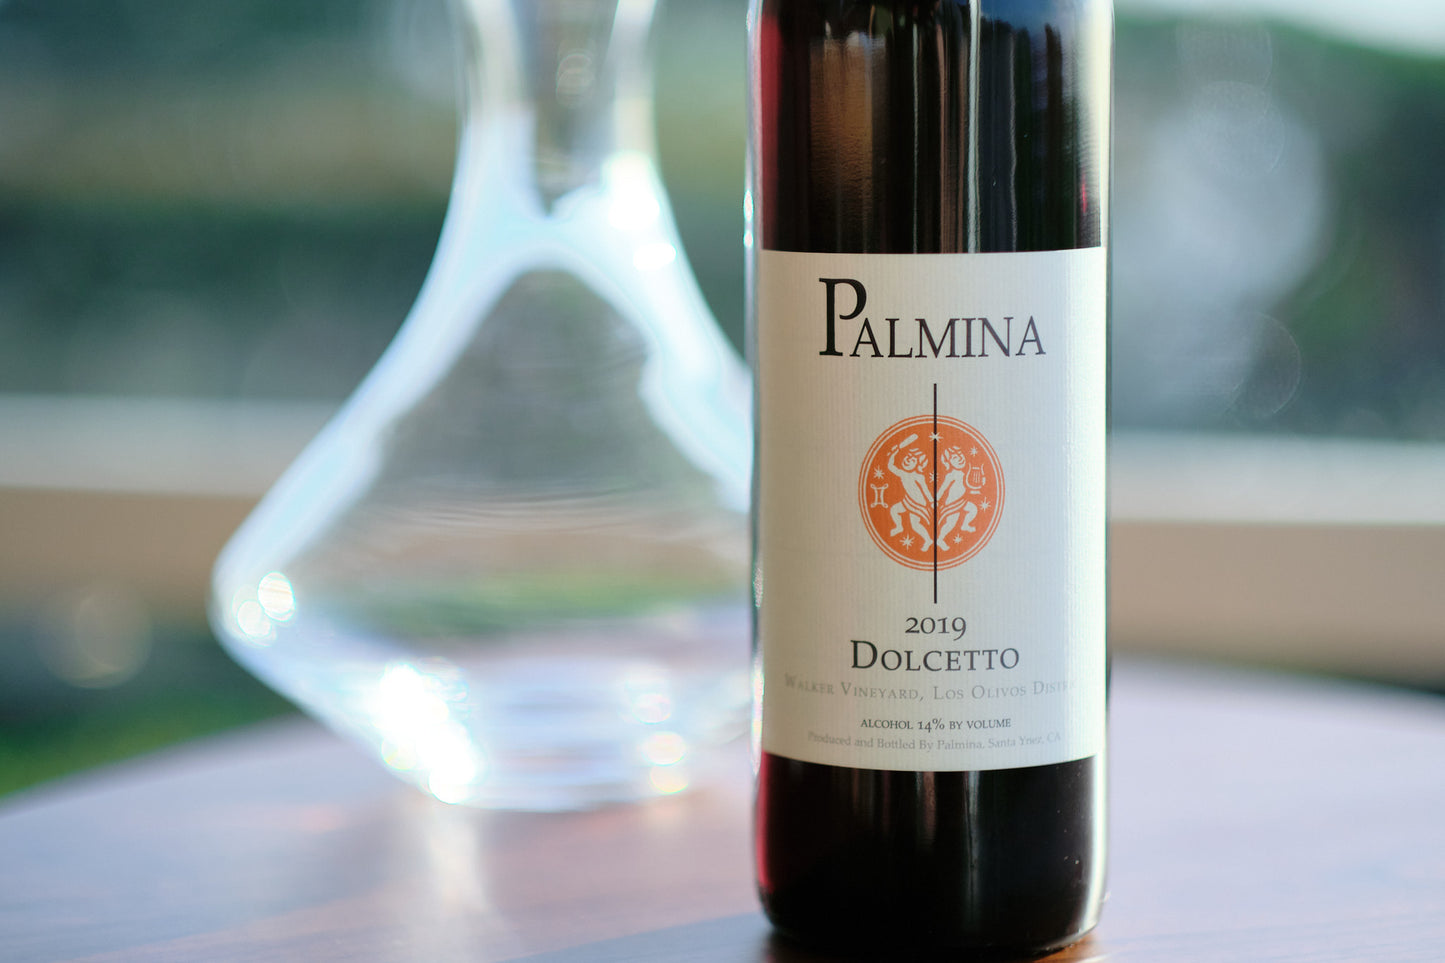 Palmina, Dolcetto 2019